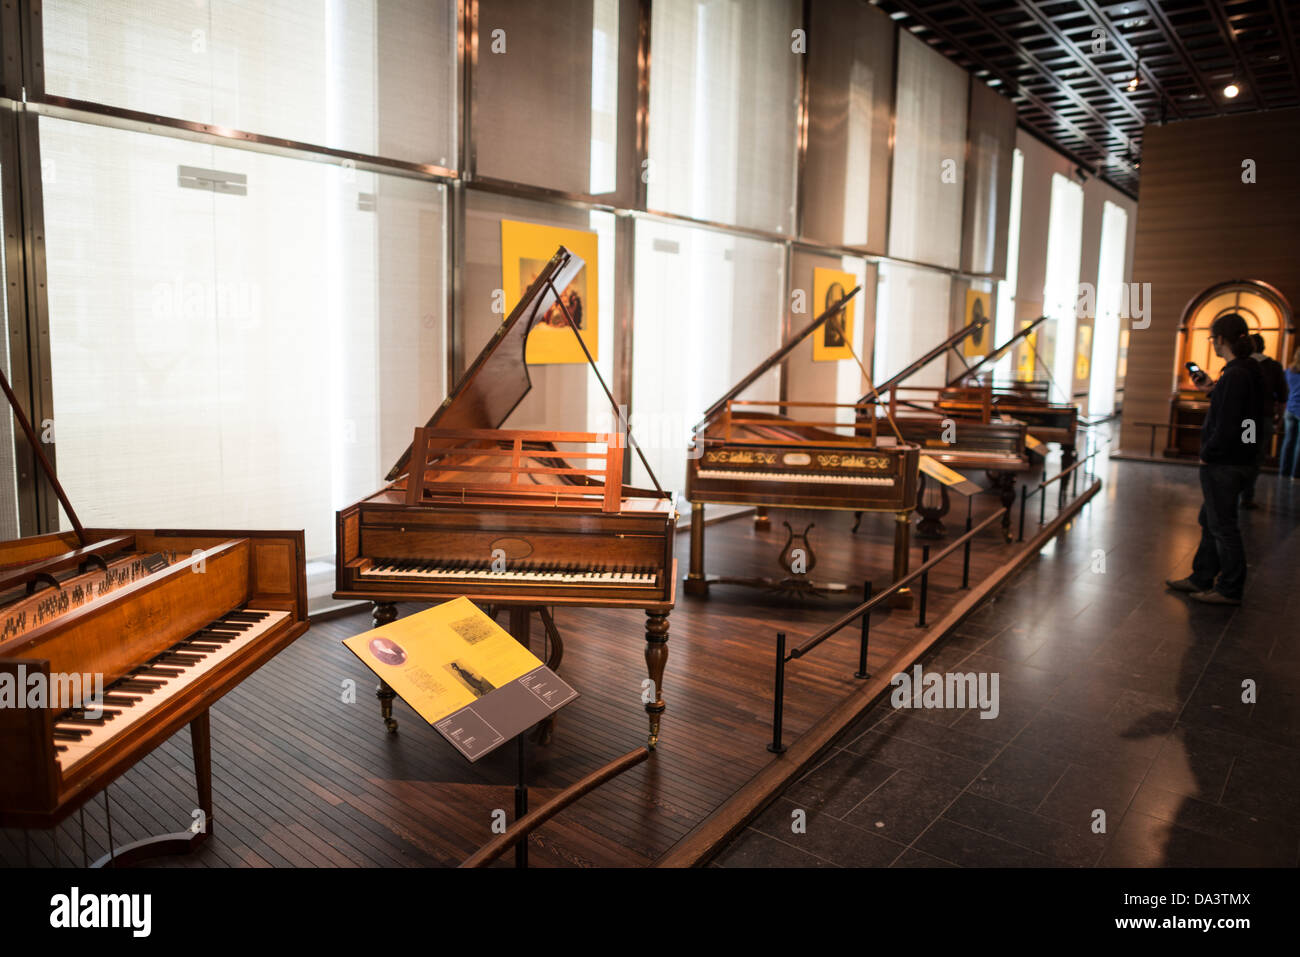 BRUSSELS, Belgium - Pianos on display at the Musical Instrument Museum in Brussels. The Musee des Instruments de Musique (Musical Instrument Museum) in Brussels contains exhibits containing more than 2000 musical instruments. Displays include historical, exotic, and traditional cultural instruments from around the world. Visitors to the museum are given handheld audio guides that play musical demonstrations of many of the instruments. The museum is housed in the distinctive Old England Building. Stock Photo